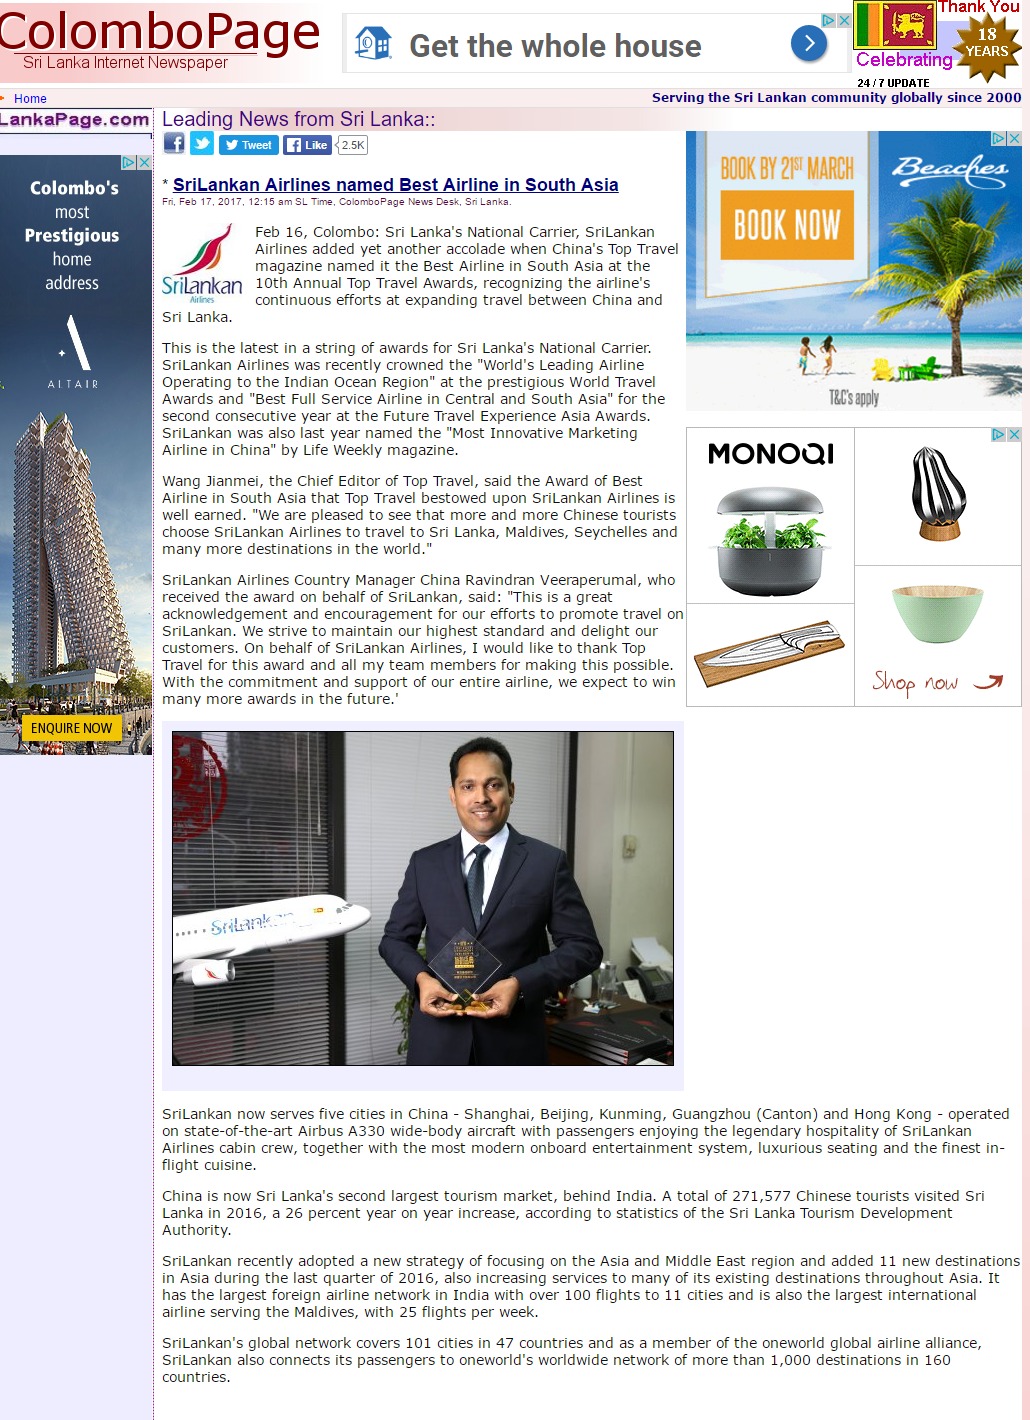 SriLankan Airlines named Best Airline in South Asia